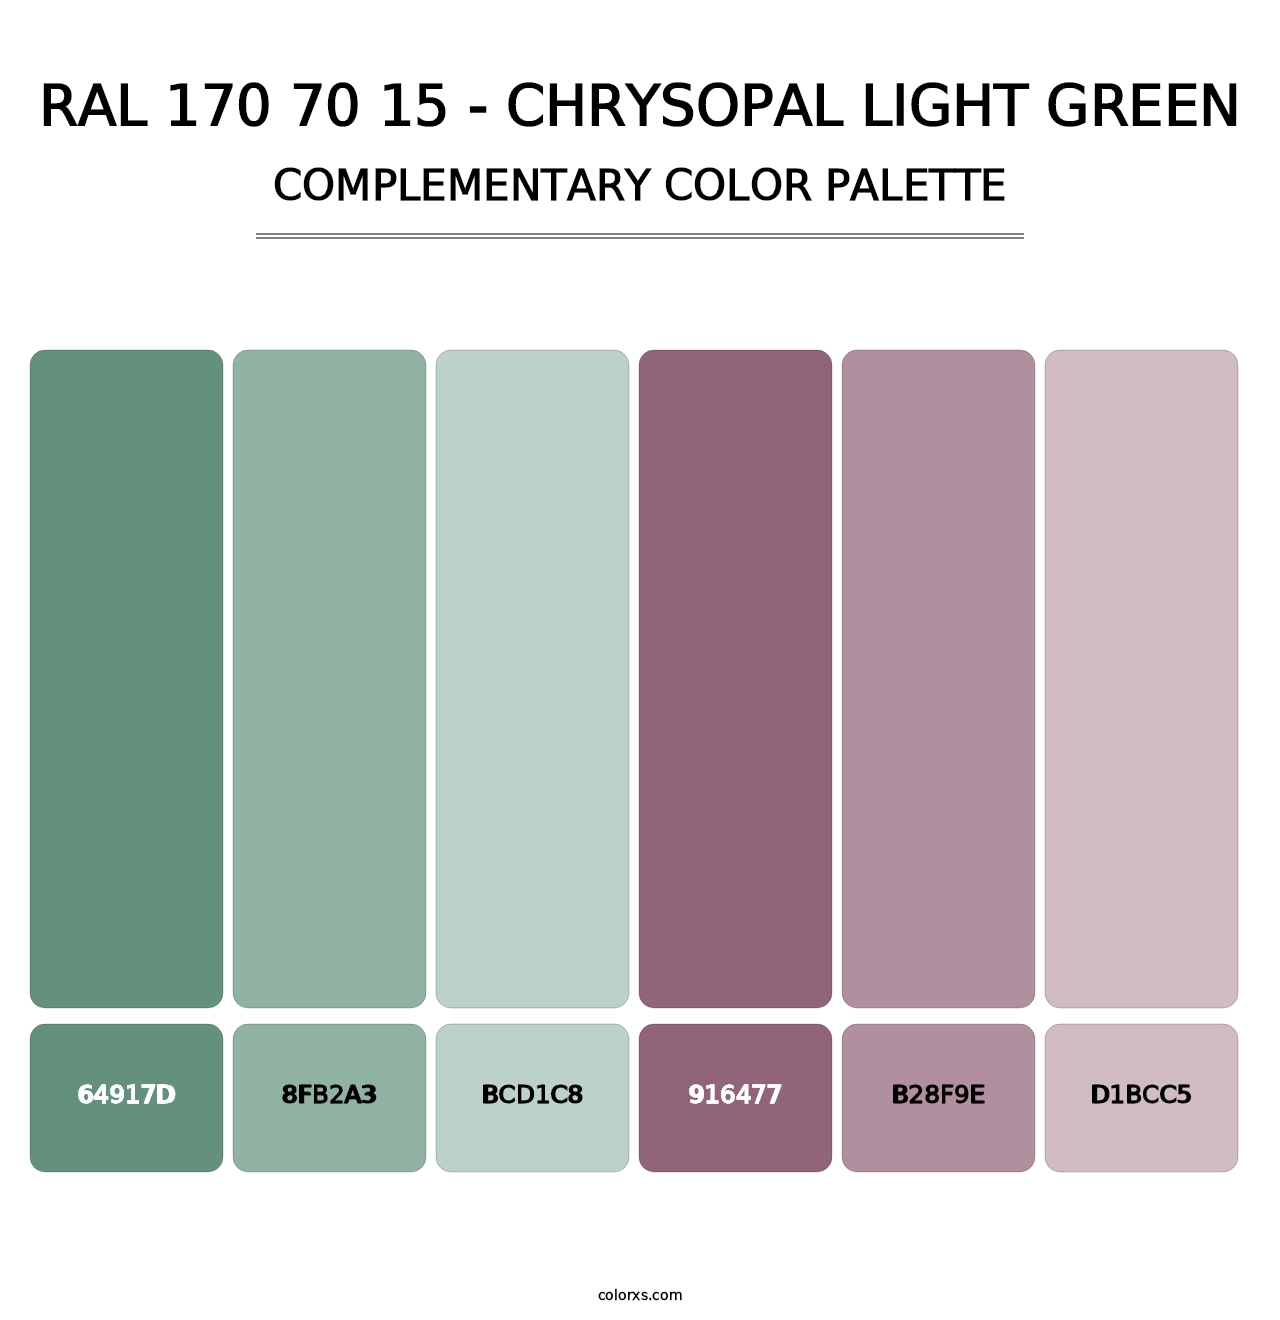 RAL 170 70 15 - Chrysopal Light Green - Complementary Color Palette